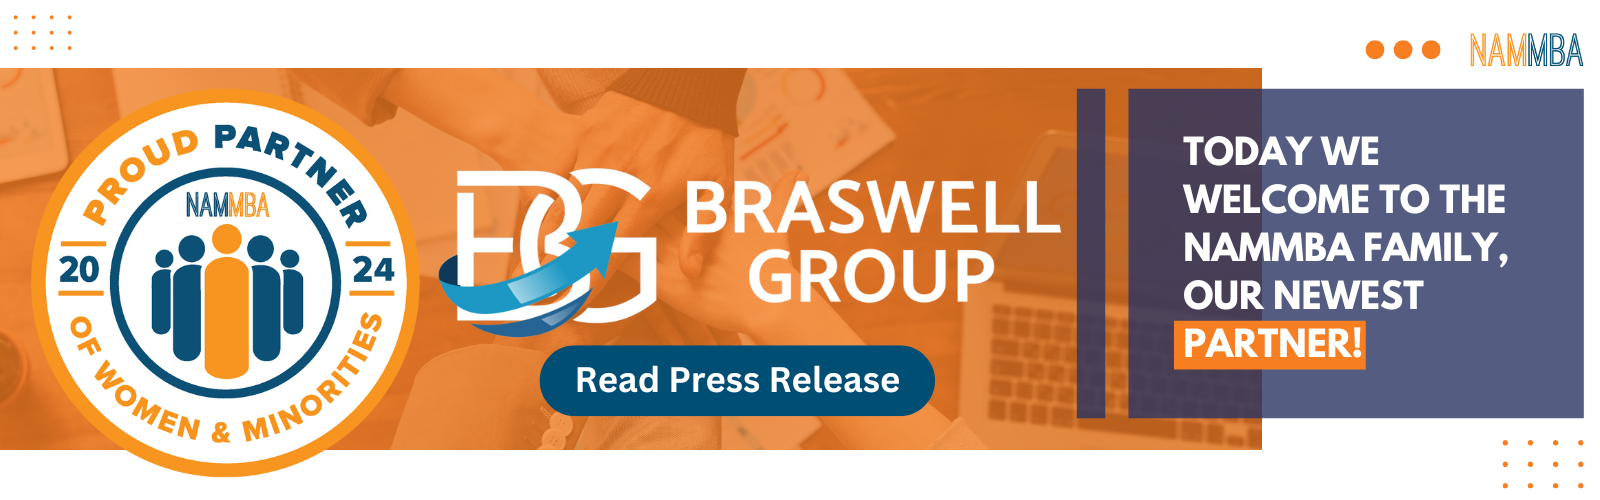 Partner Announcement - The Braswell Group.png